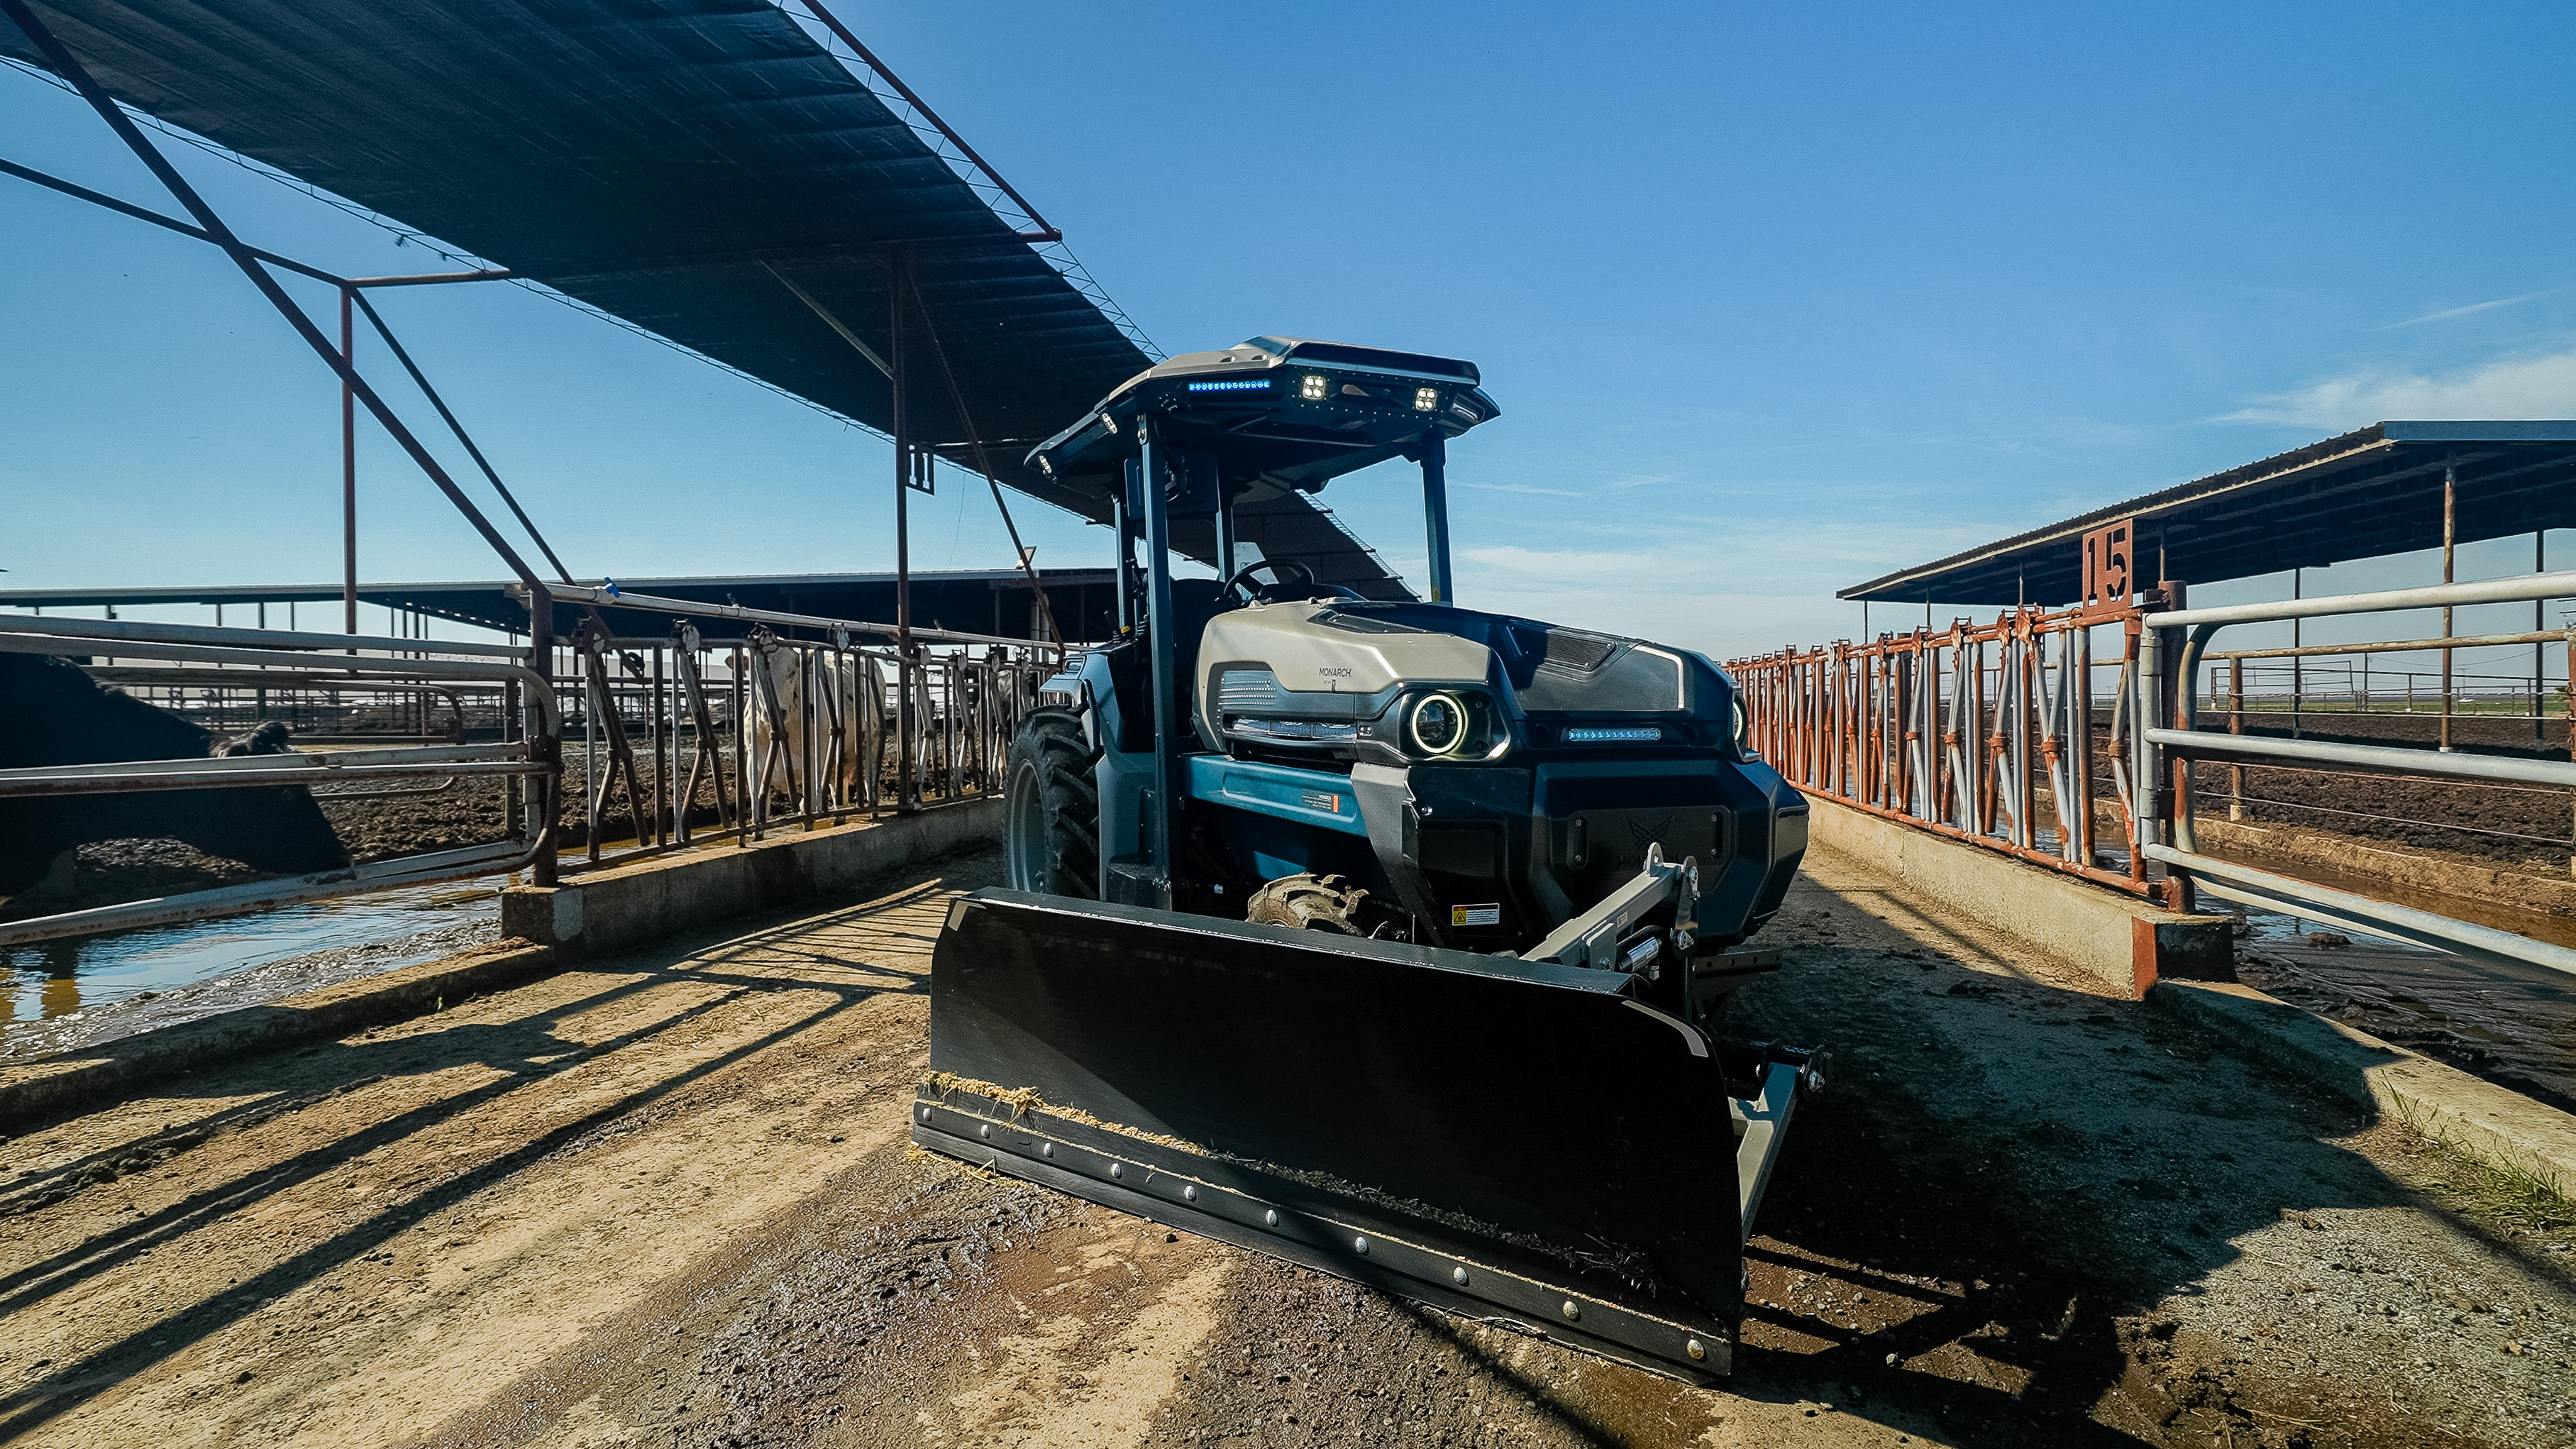 MK-V battery has a feed-pushing run time of up to 14 hours depending on the farm and location.